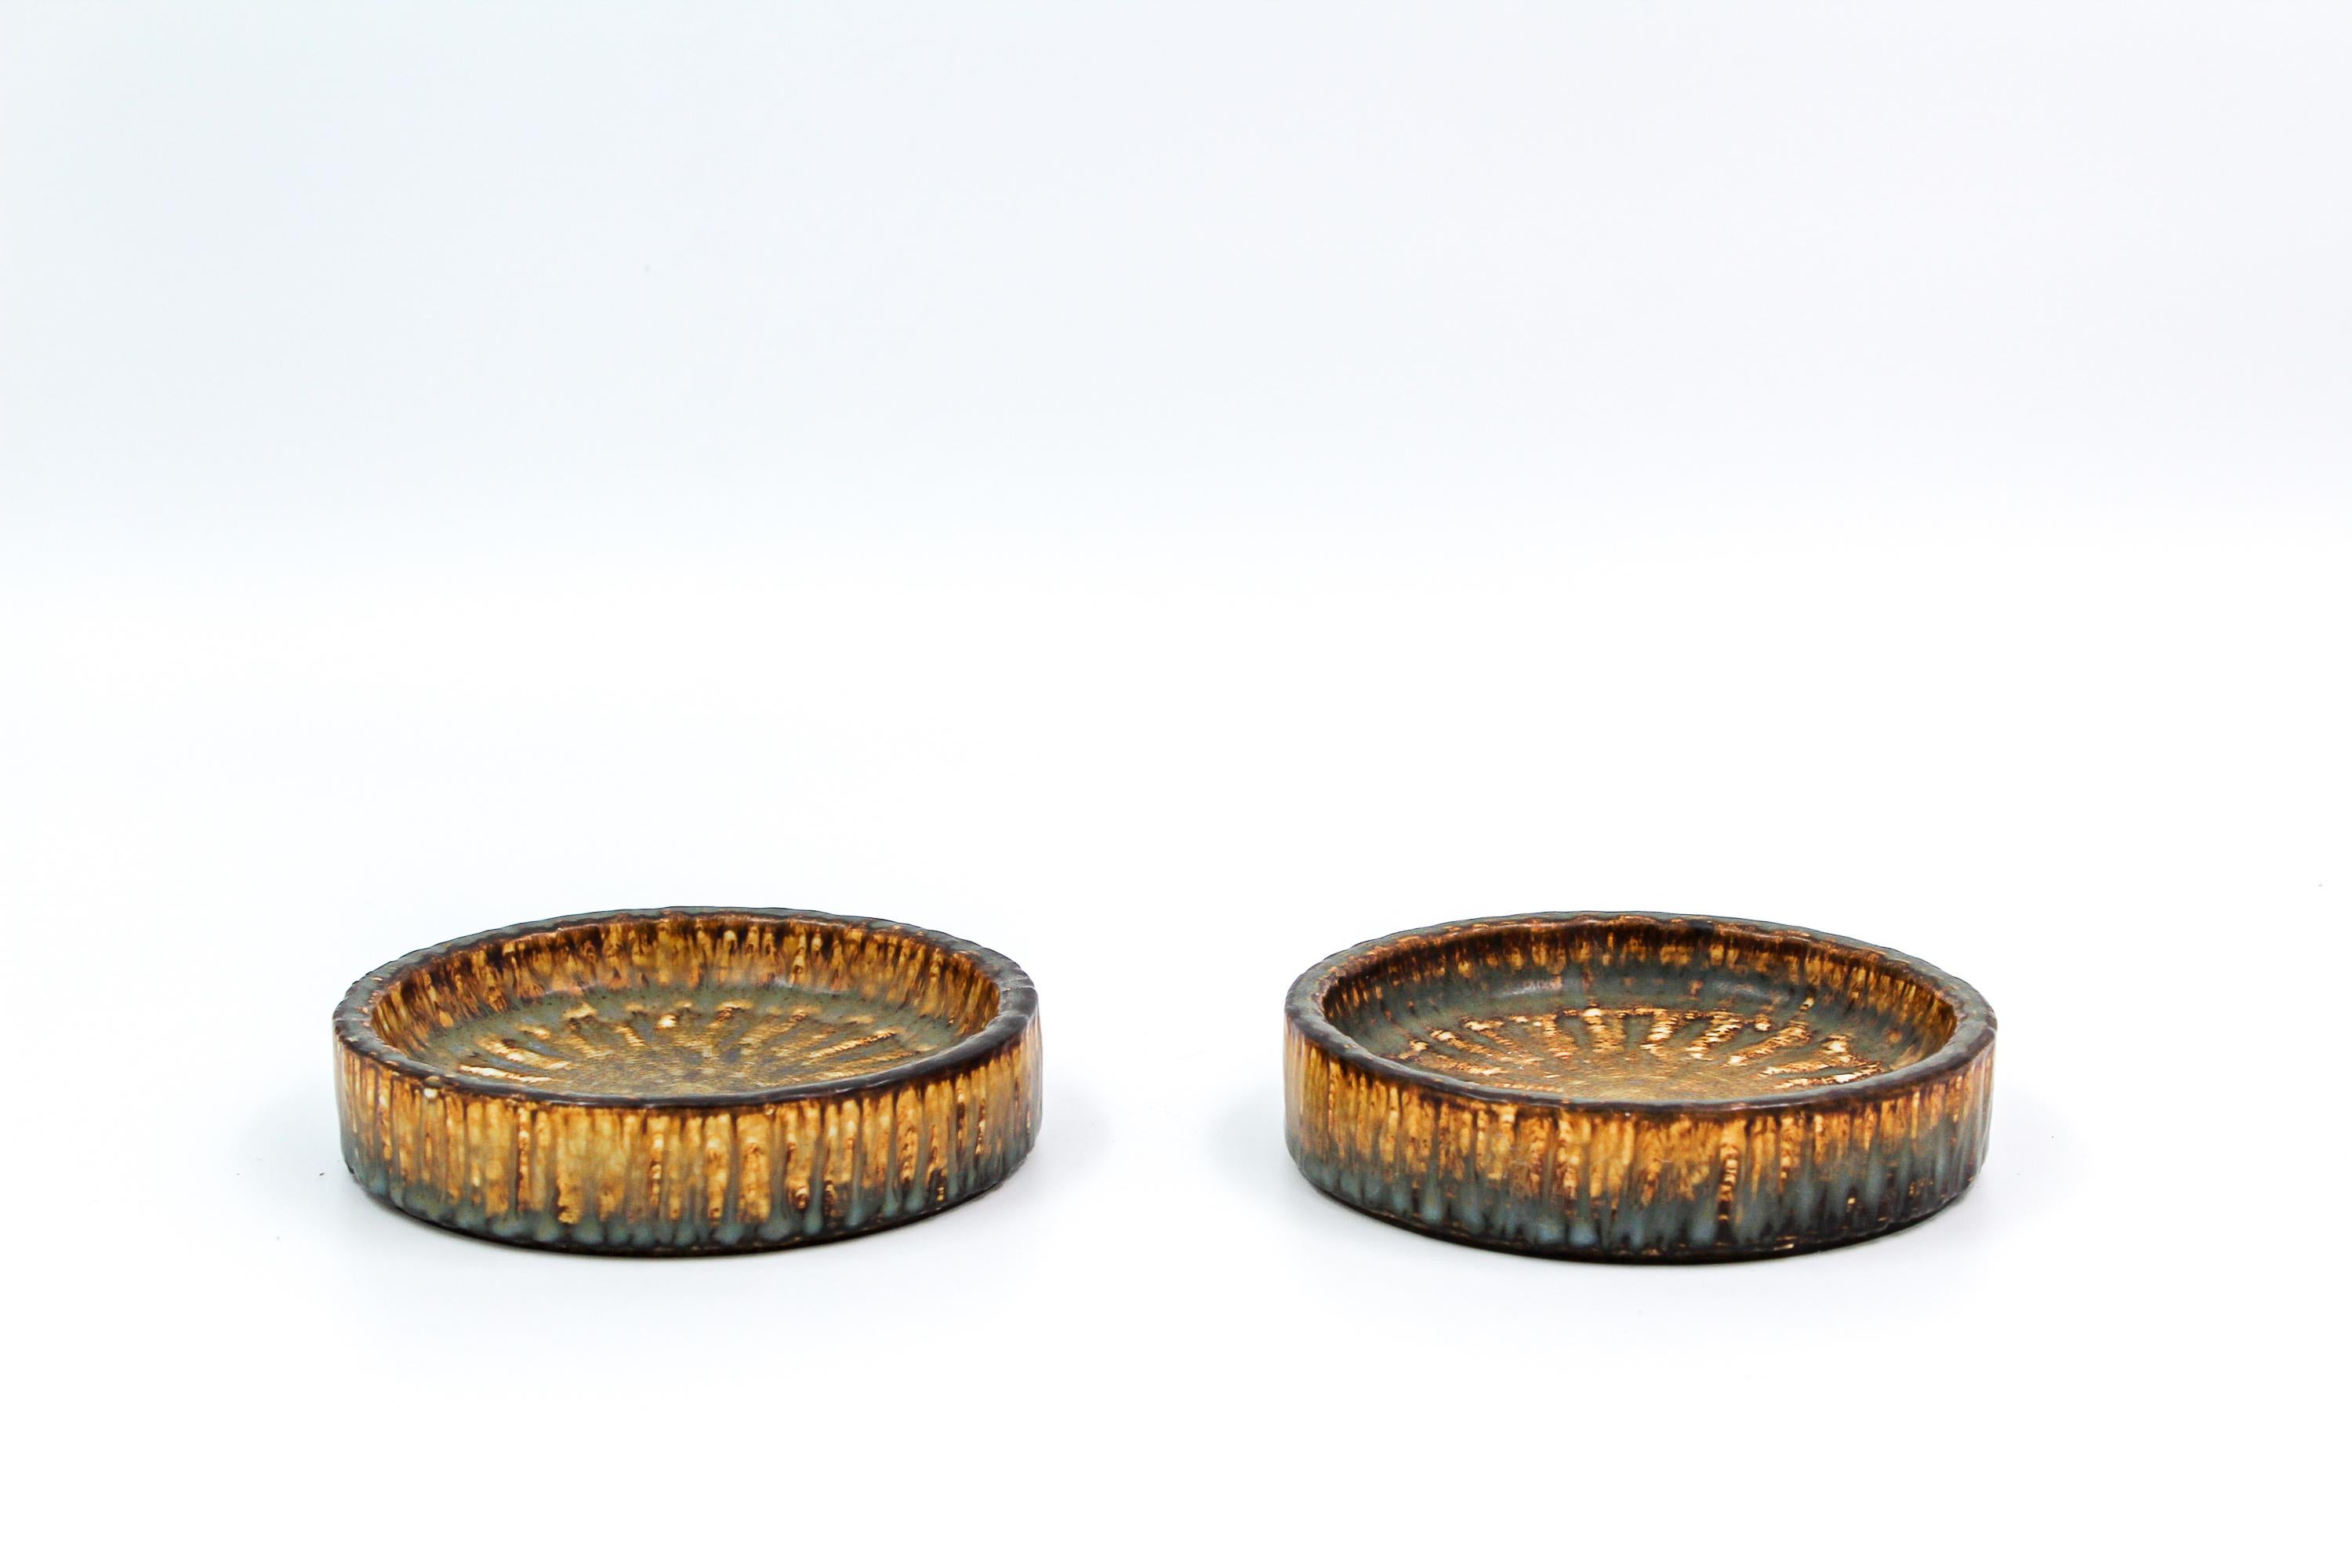 Pair of Midcentury Ceramic Bowls by Gunnar Nylund for Rörstrand, 1950s In Good Condition For Sale In Malmo, SE